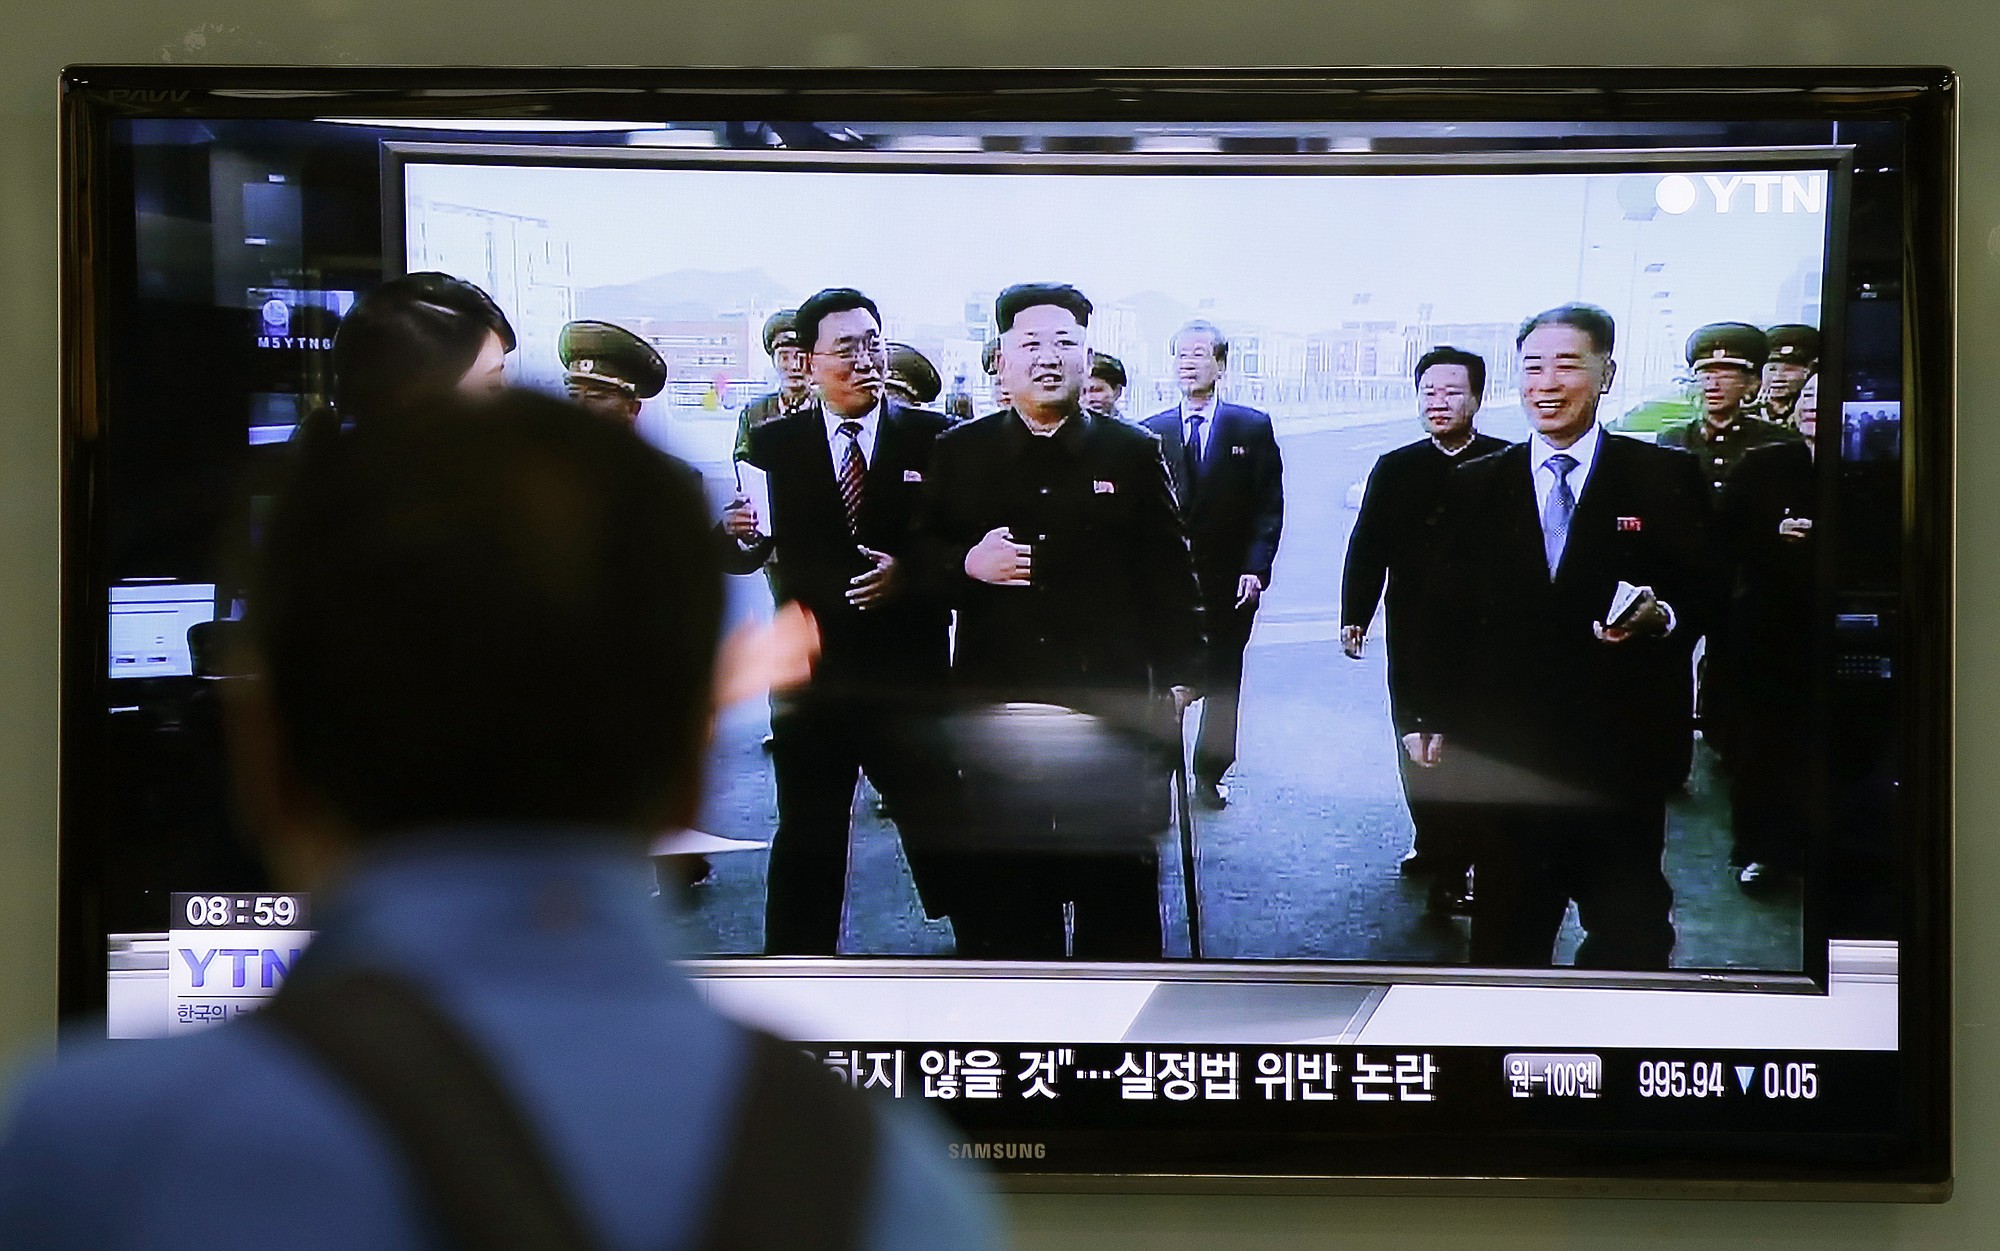 A man watches a TV news program at the Seoul Railway Station in Seoul, South Korea, showing North Korean leader Kim Jong Un using a cane, reportedly during his first public appearance in five weeks in Pyongyang, North Korea.